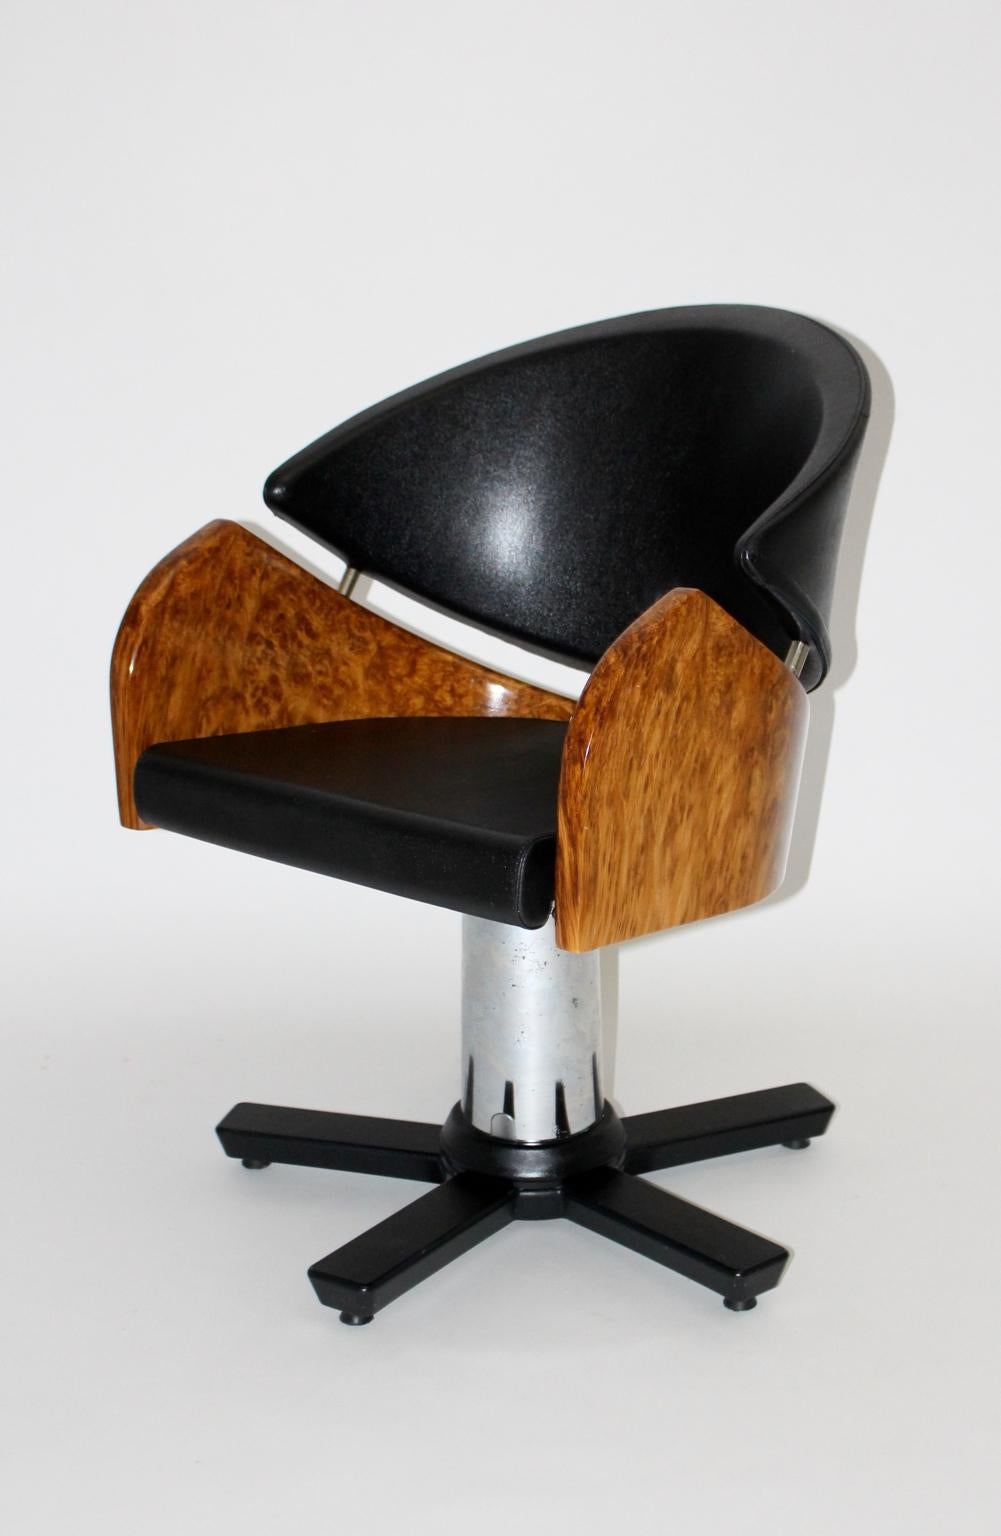 Memphis style Black and Brown modern swivelling desk chair or office chair attributed to Matteo Grassi, Italy. The armchair consists of steel and chromed aluminum, black plastic and walnut imitation (plastic).
The seat and the back were covered with